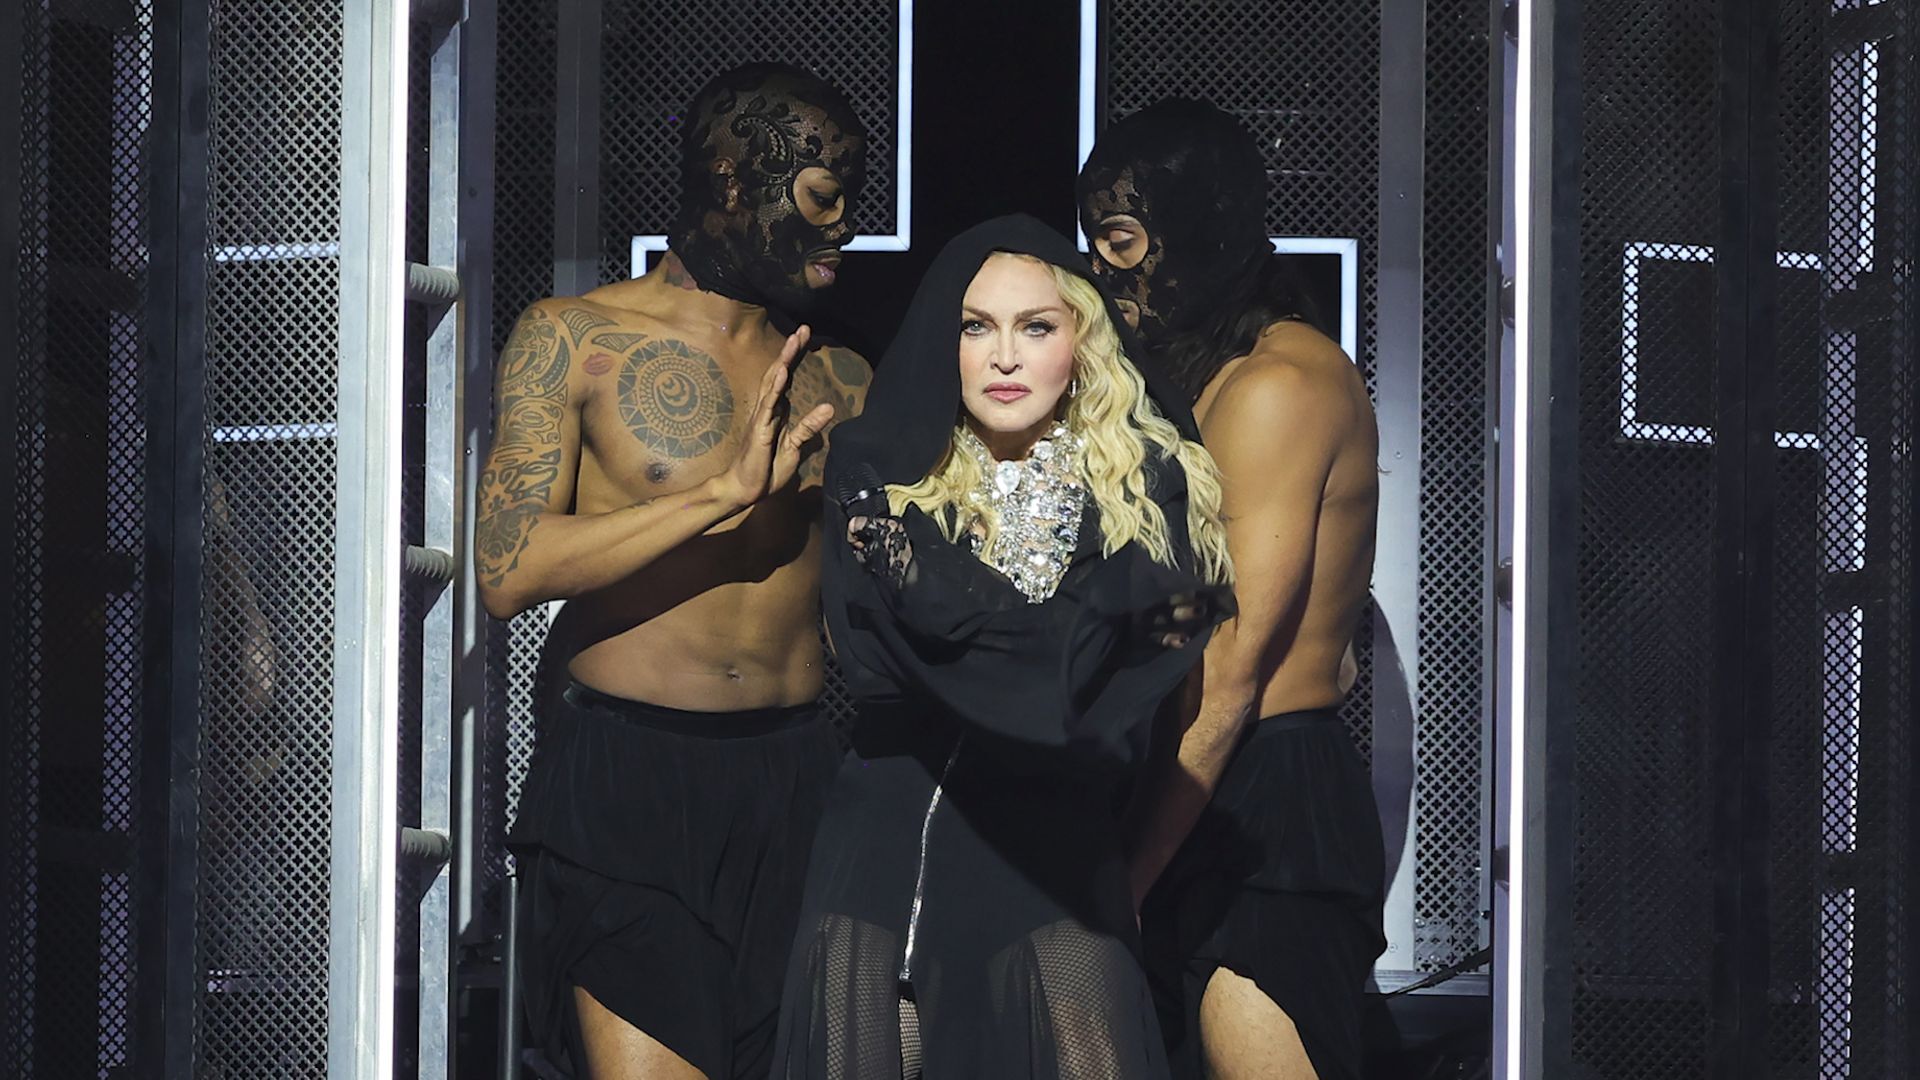 A fan is suing Madonna, alleging that the singer exposed him to “pornography without warning” and failed to provide proper air conditioning.